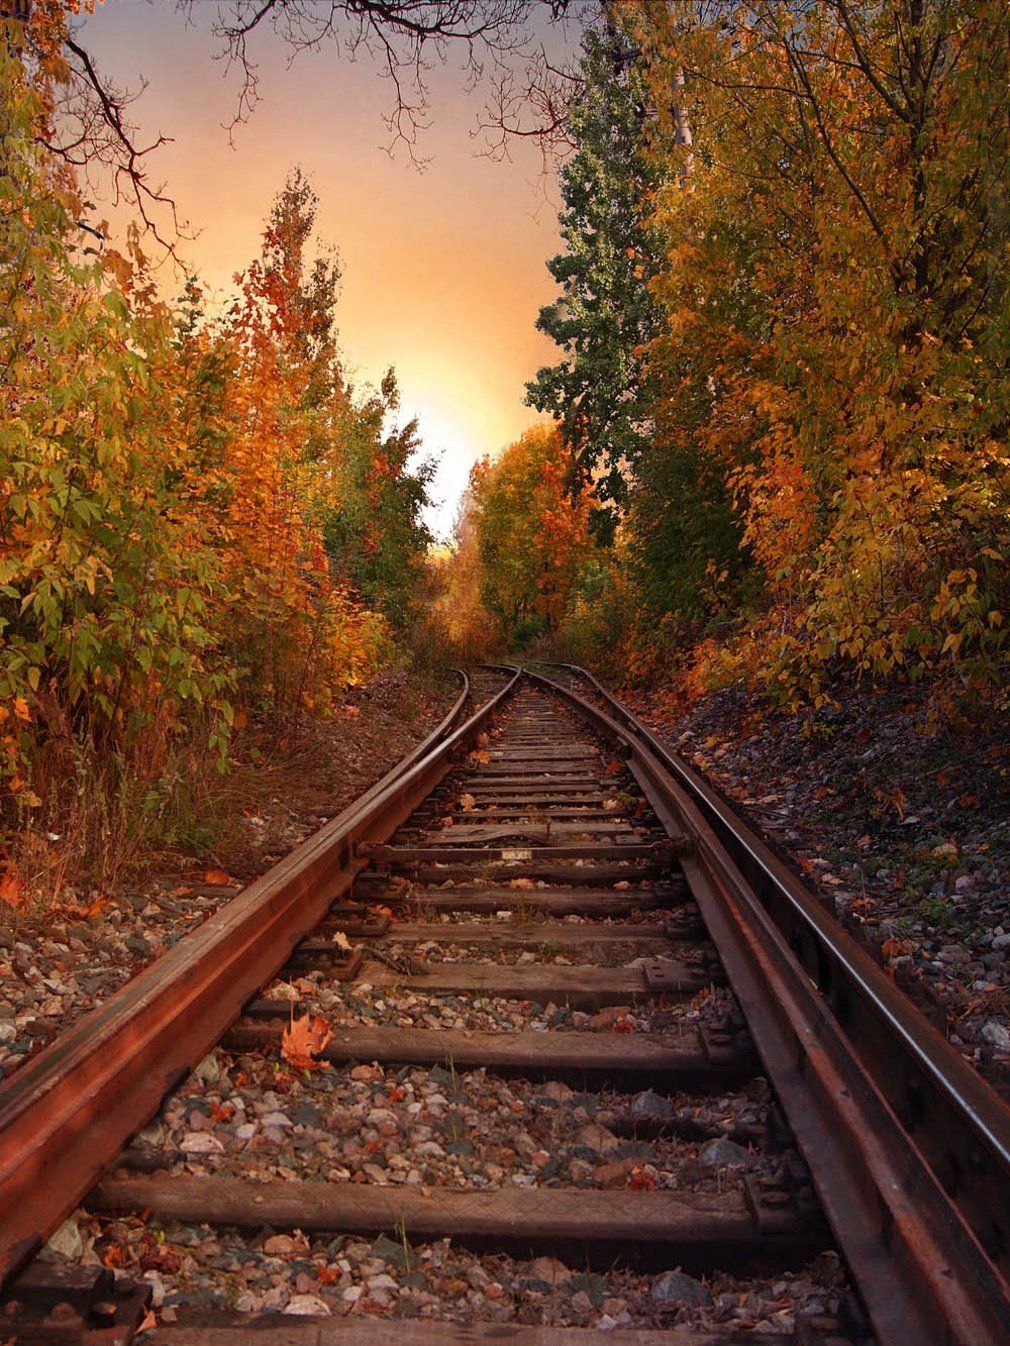 Railway Photography Background Countryside Autumn Scenery Forest Trees  Outdoor Nature View Fall Scenic Photo Backdrops for Studio